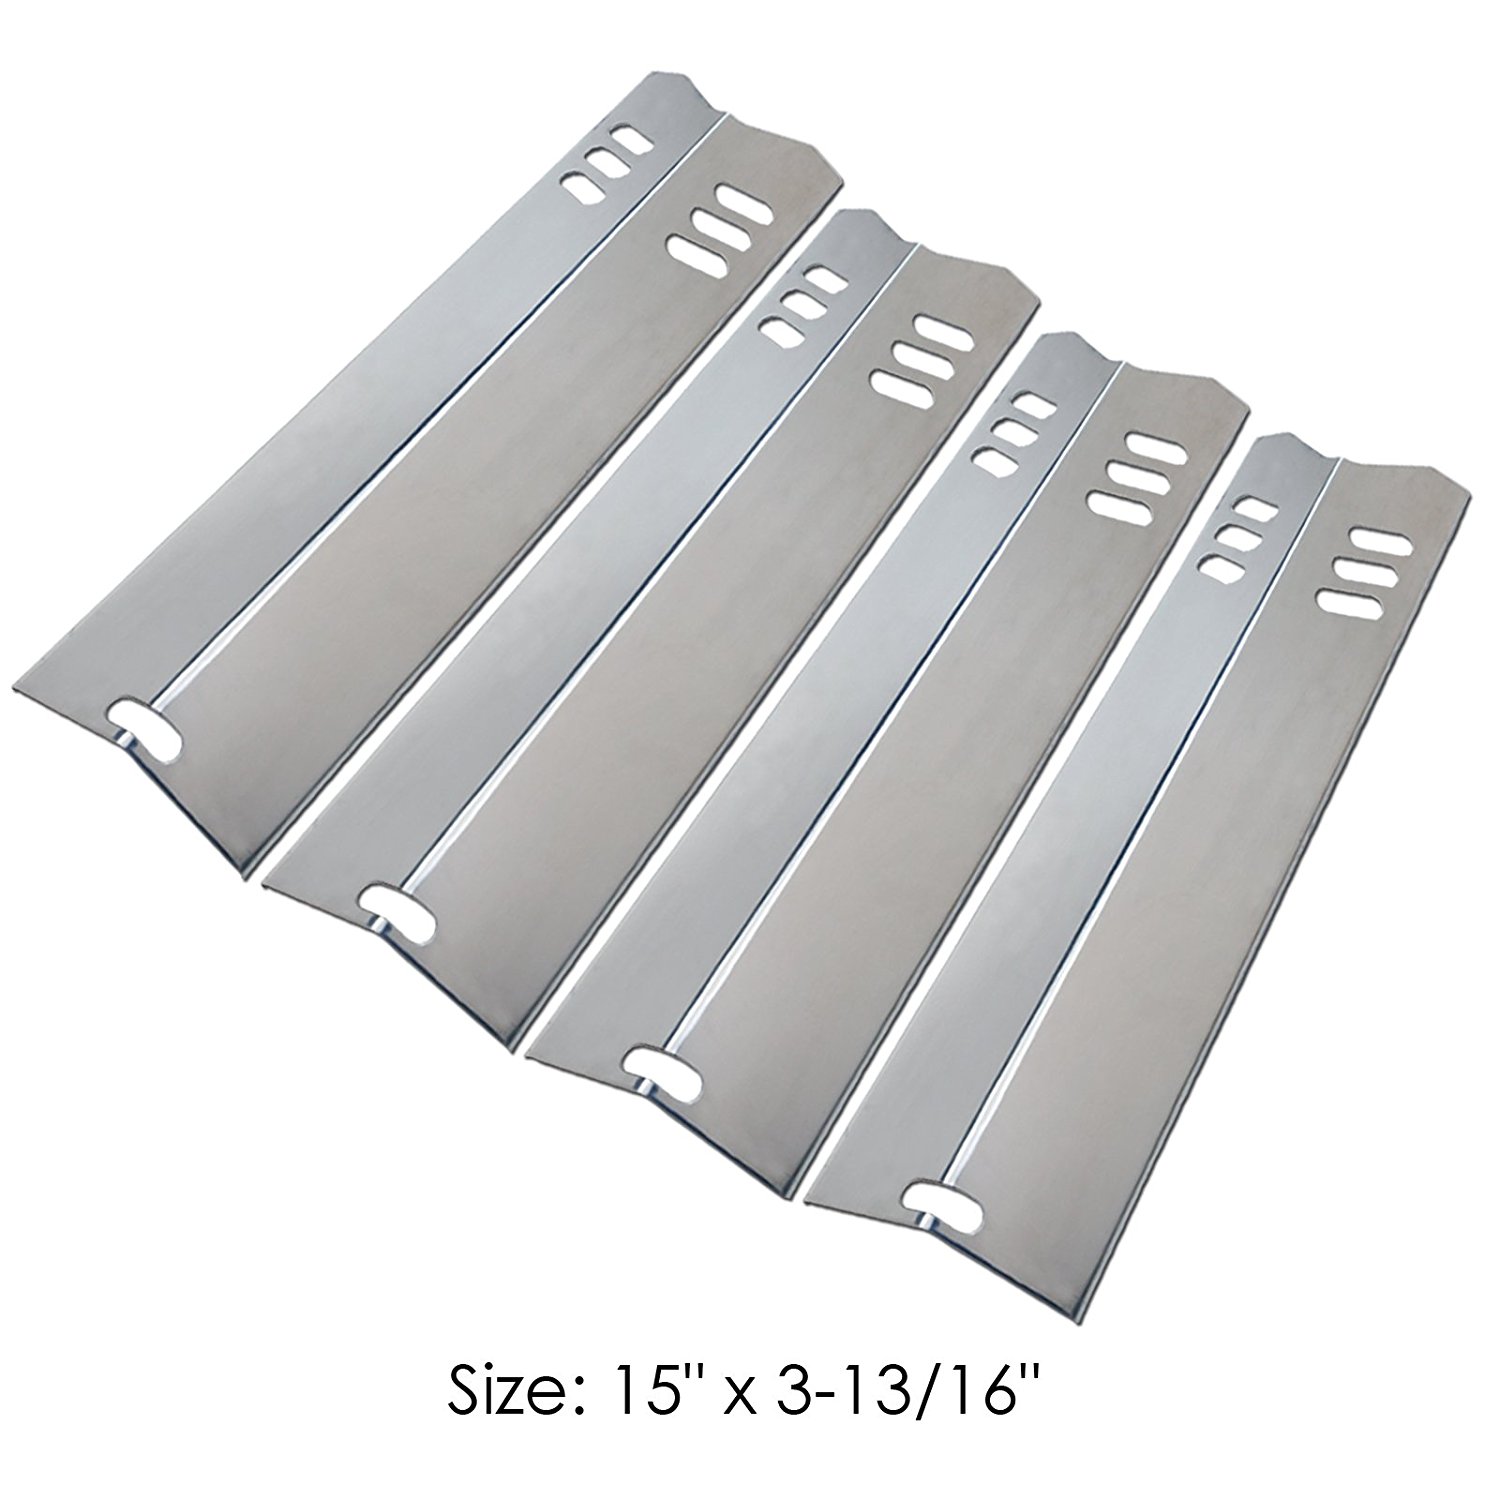 4 Pack Stainless Steel Grill Heat Shield Plate Flavorizer Bars